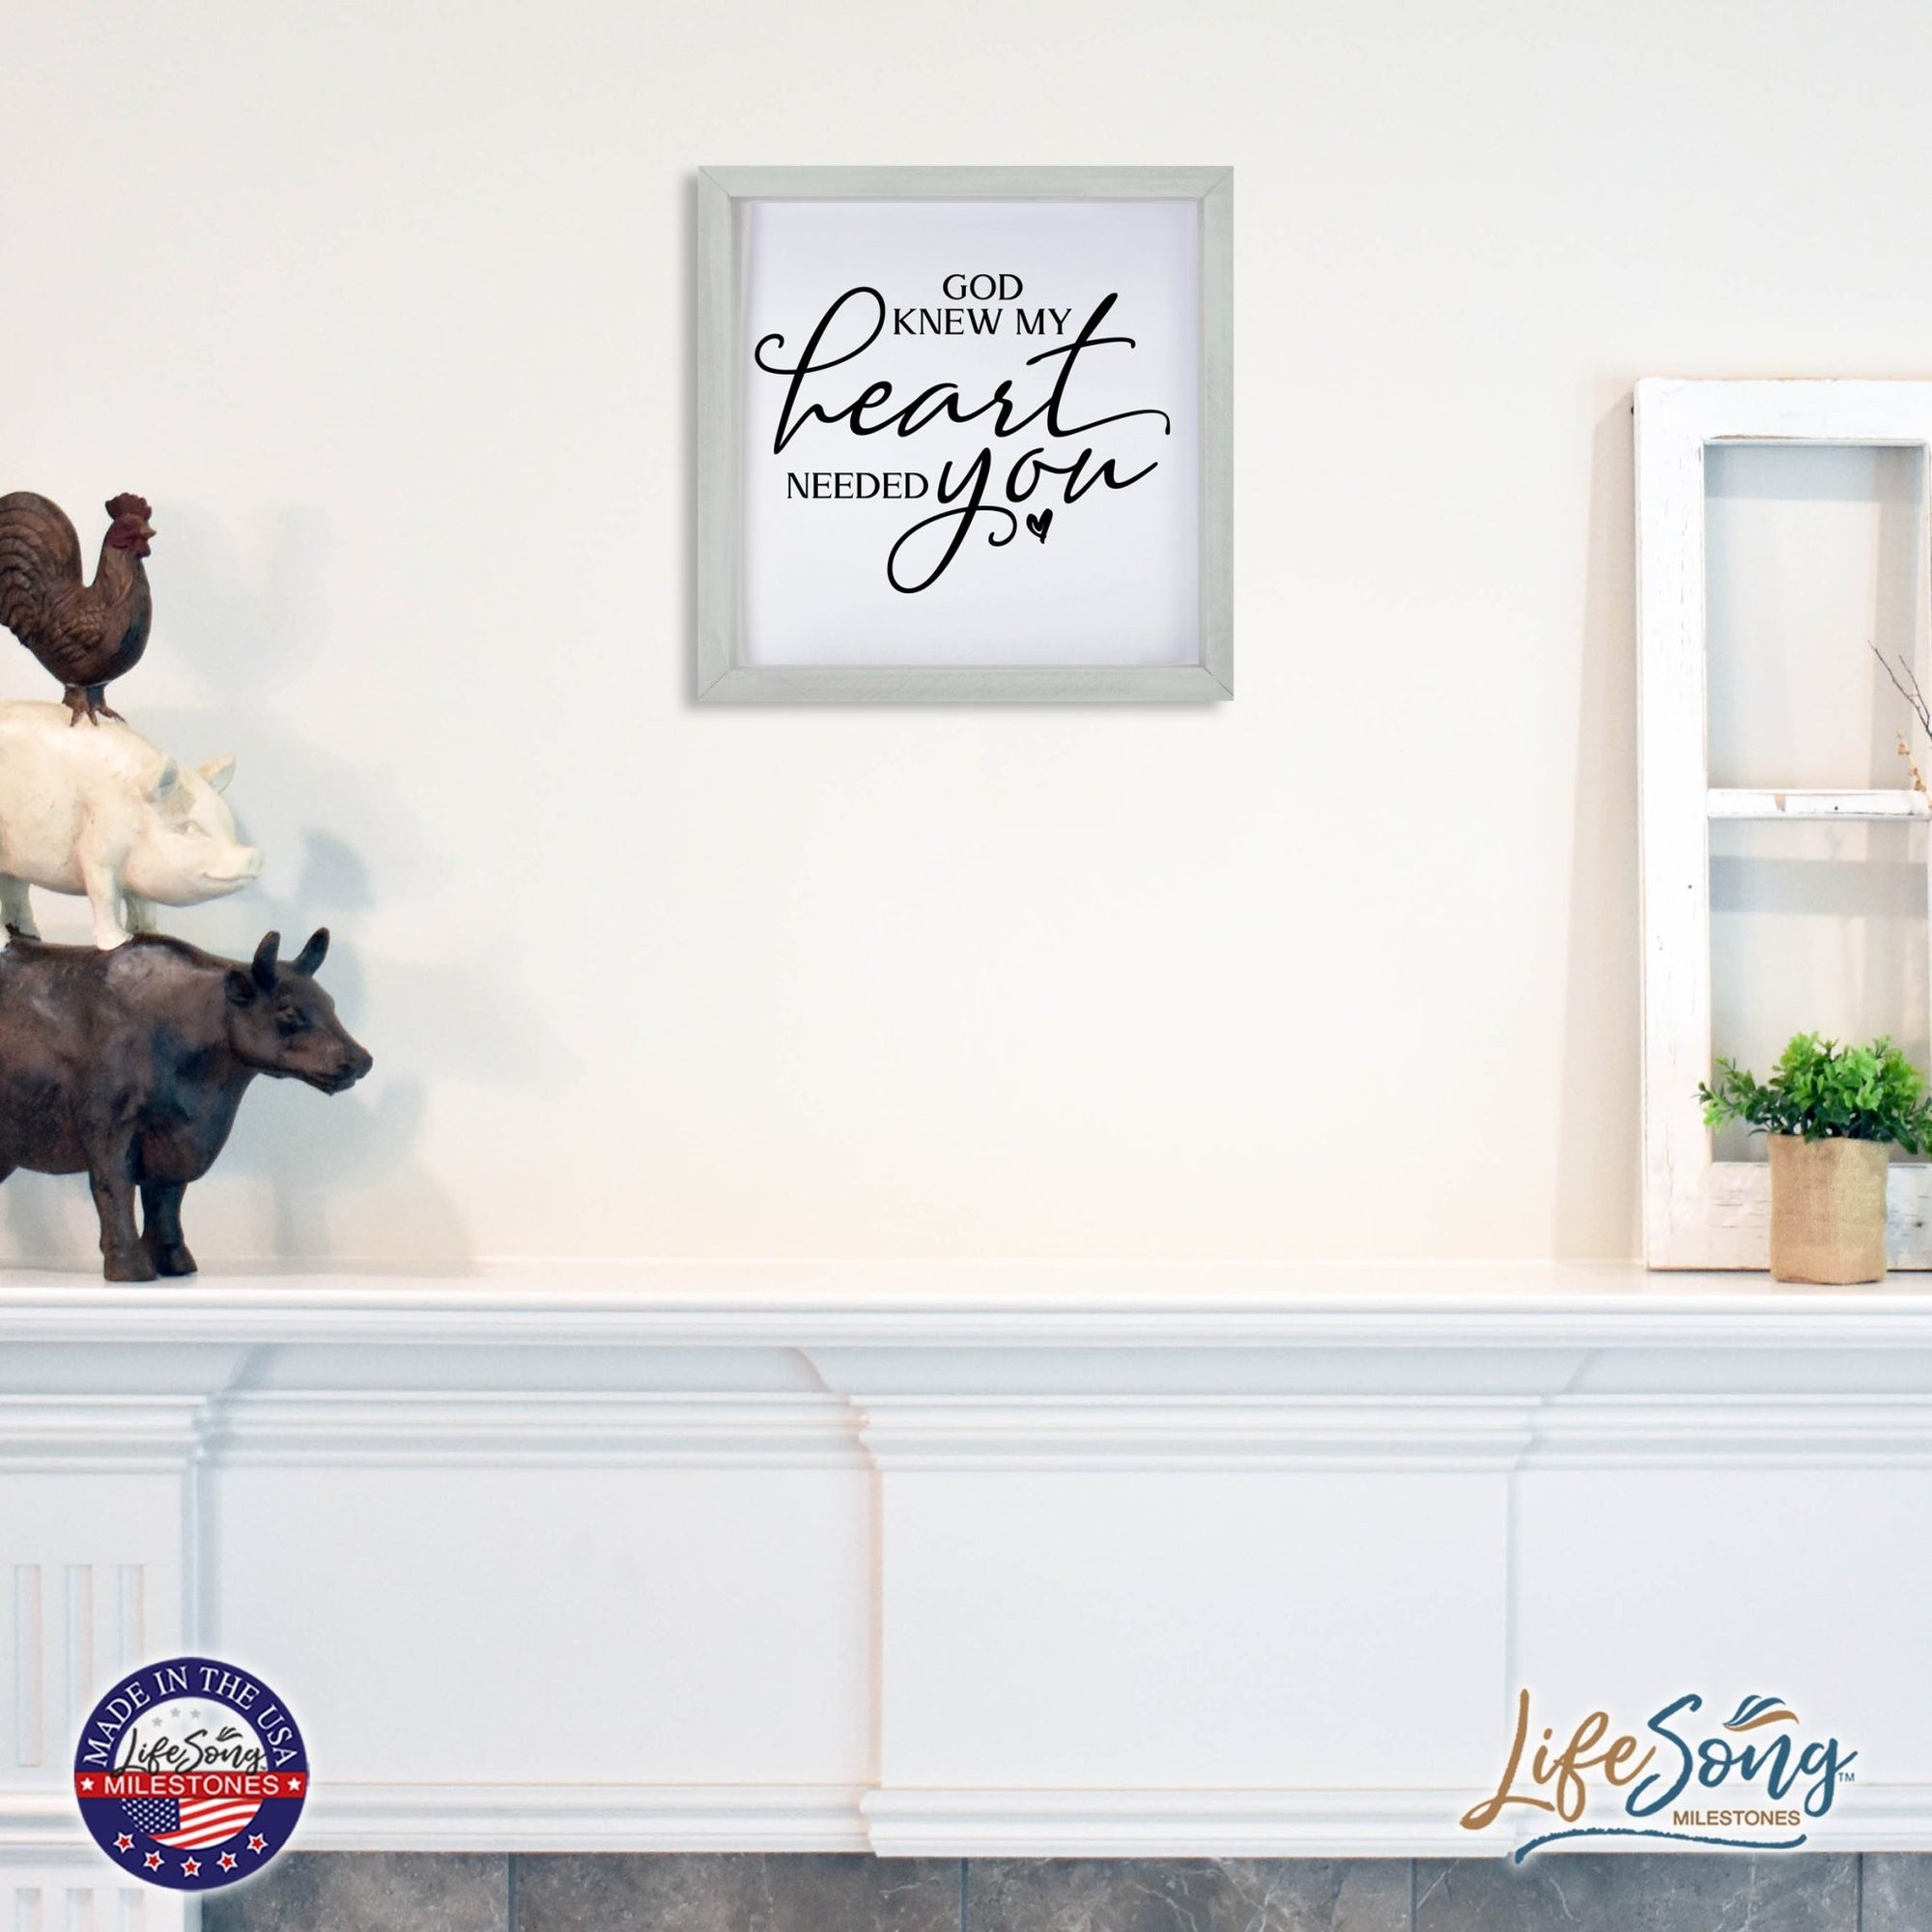 Inspiring Modern Framed Shadow Box 7x7in - God Knew My Heart Needed You (Script) - LifeSong Milestones